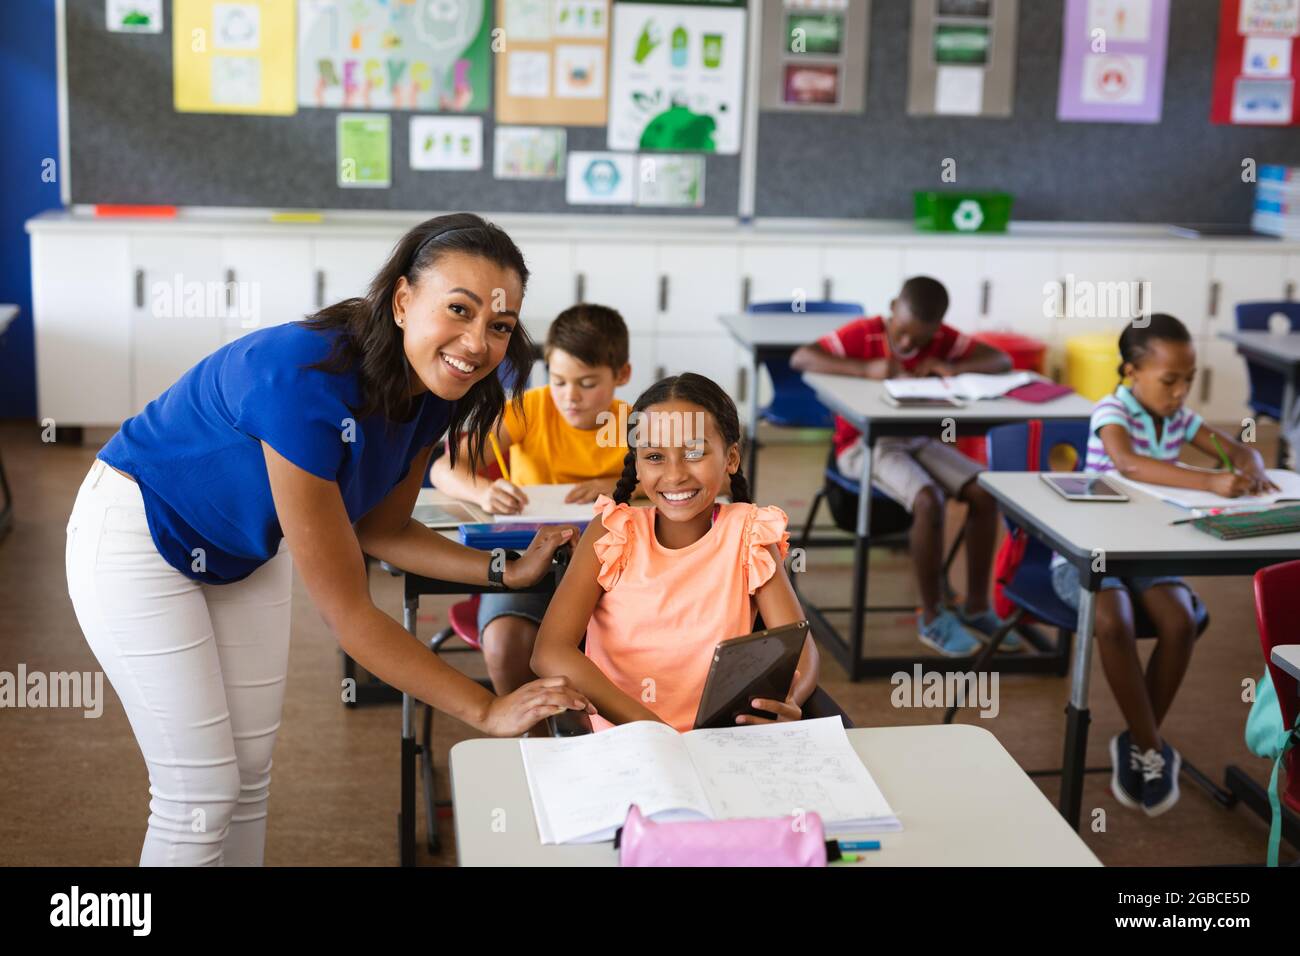 portrait-of-african-american-female-teacher-and-disabled-girl-smiling-in-class-at-elementary-school-2GBCE5D